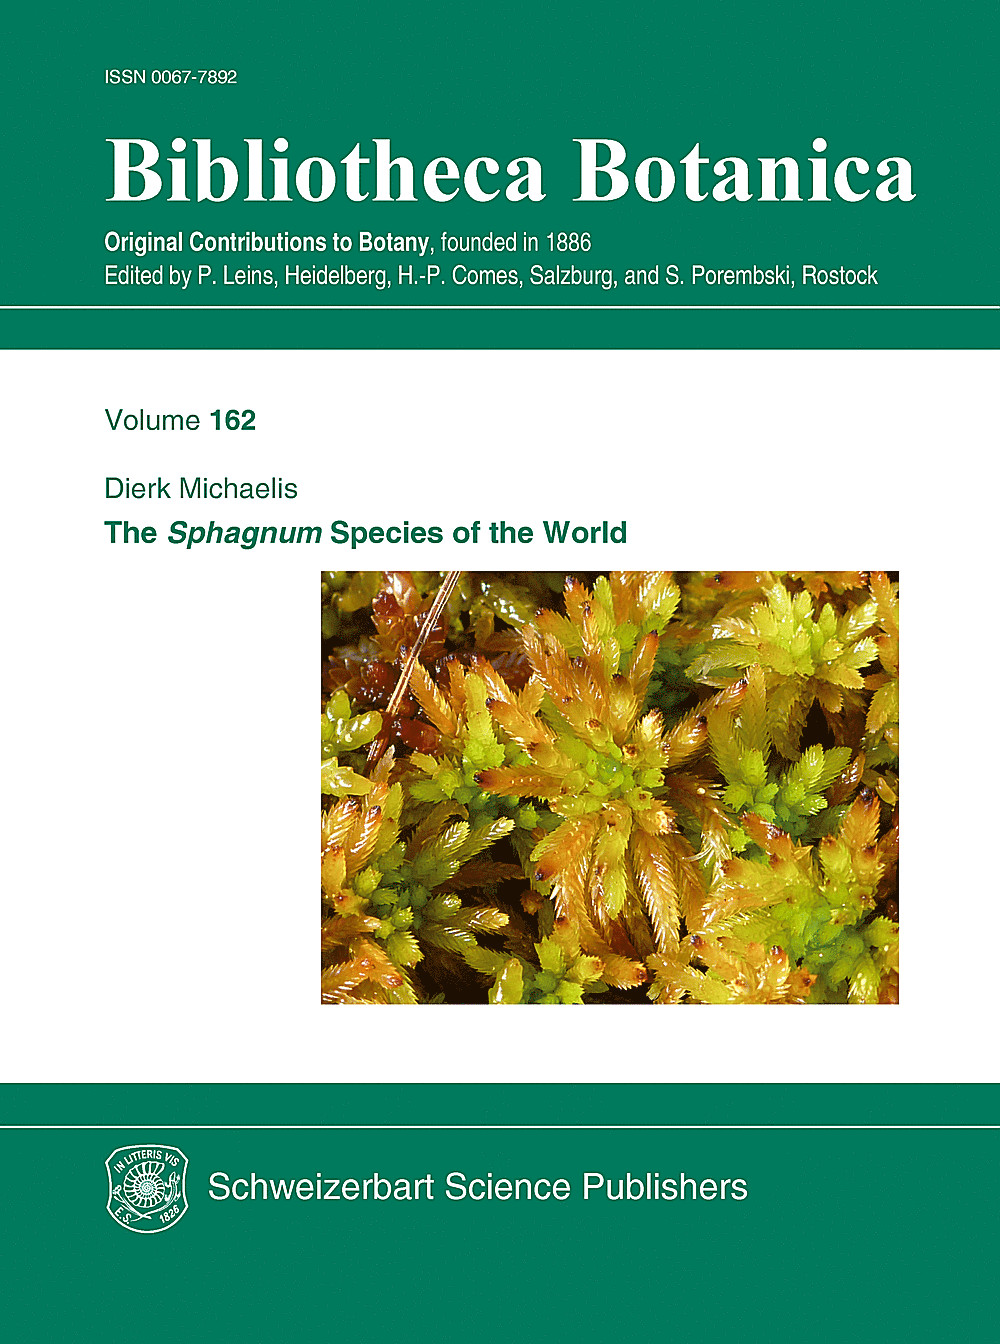 The Sphagnum species of the world image